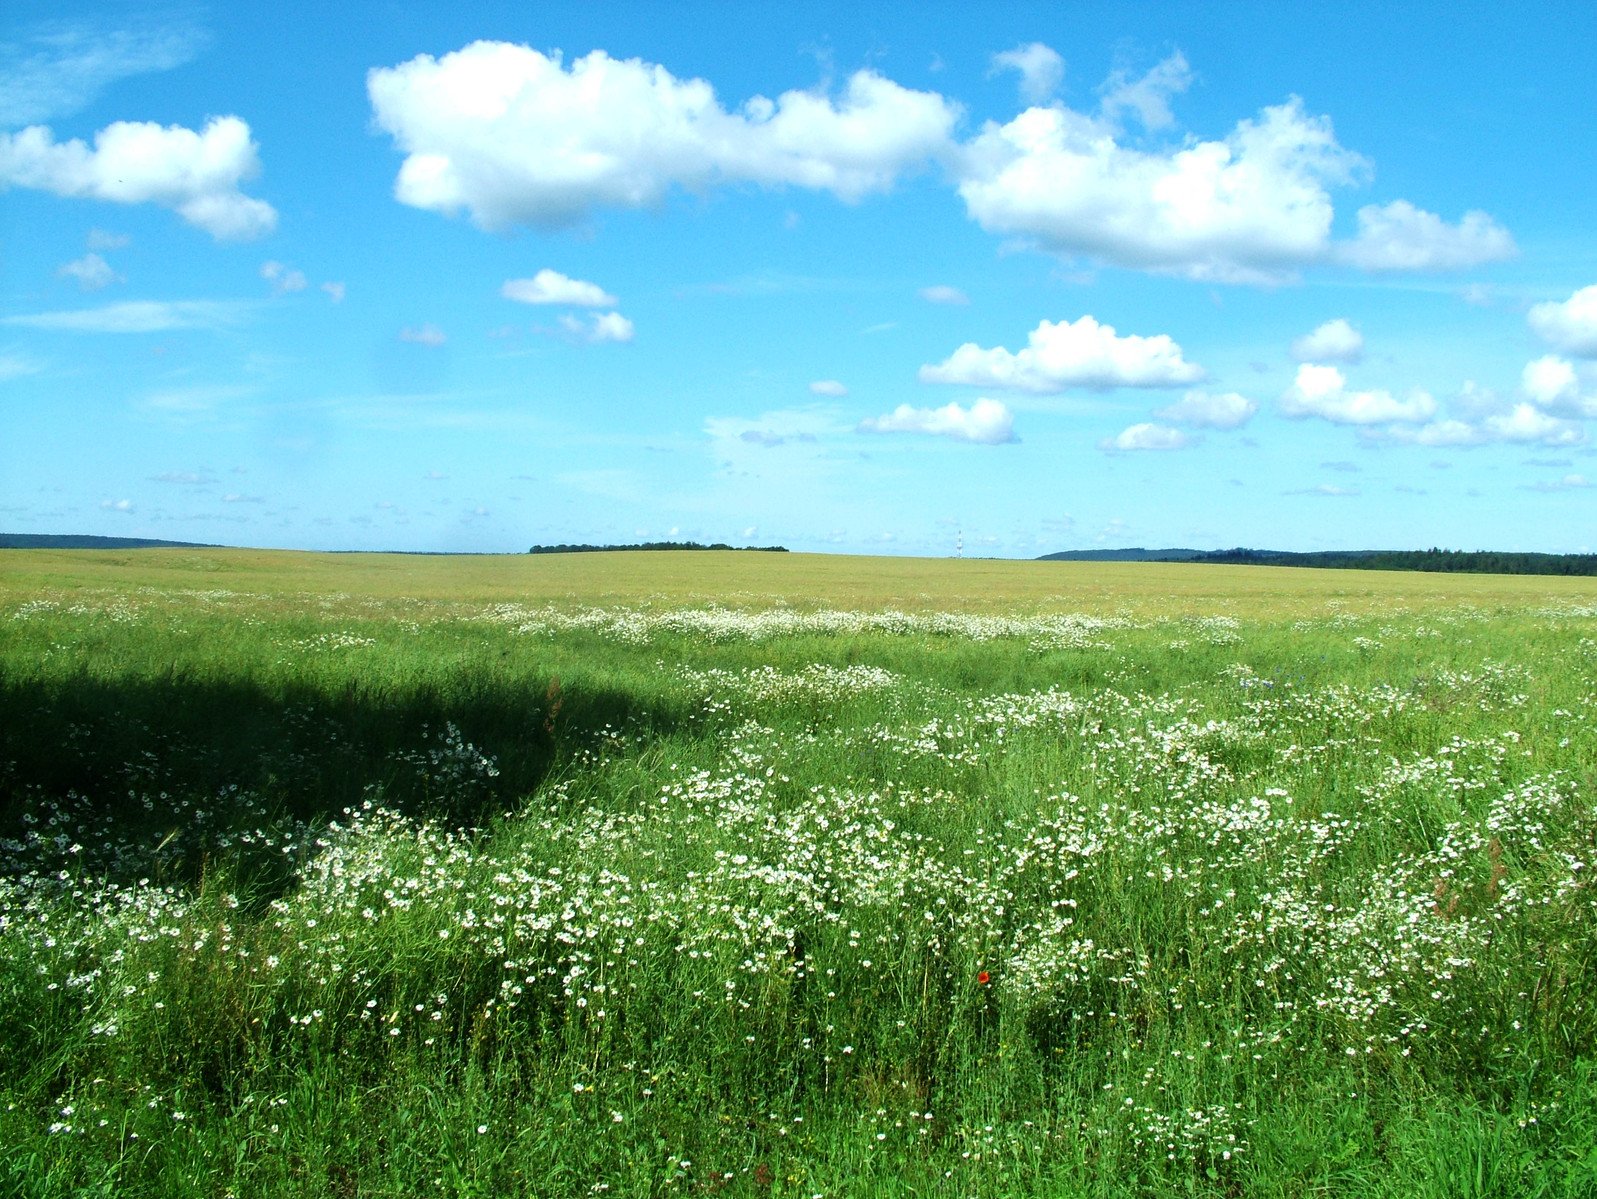 there is a field with some grass and white flowers